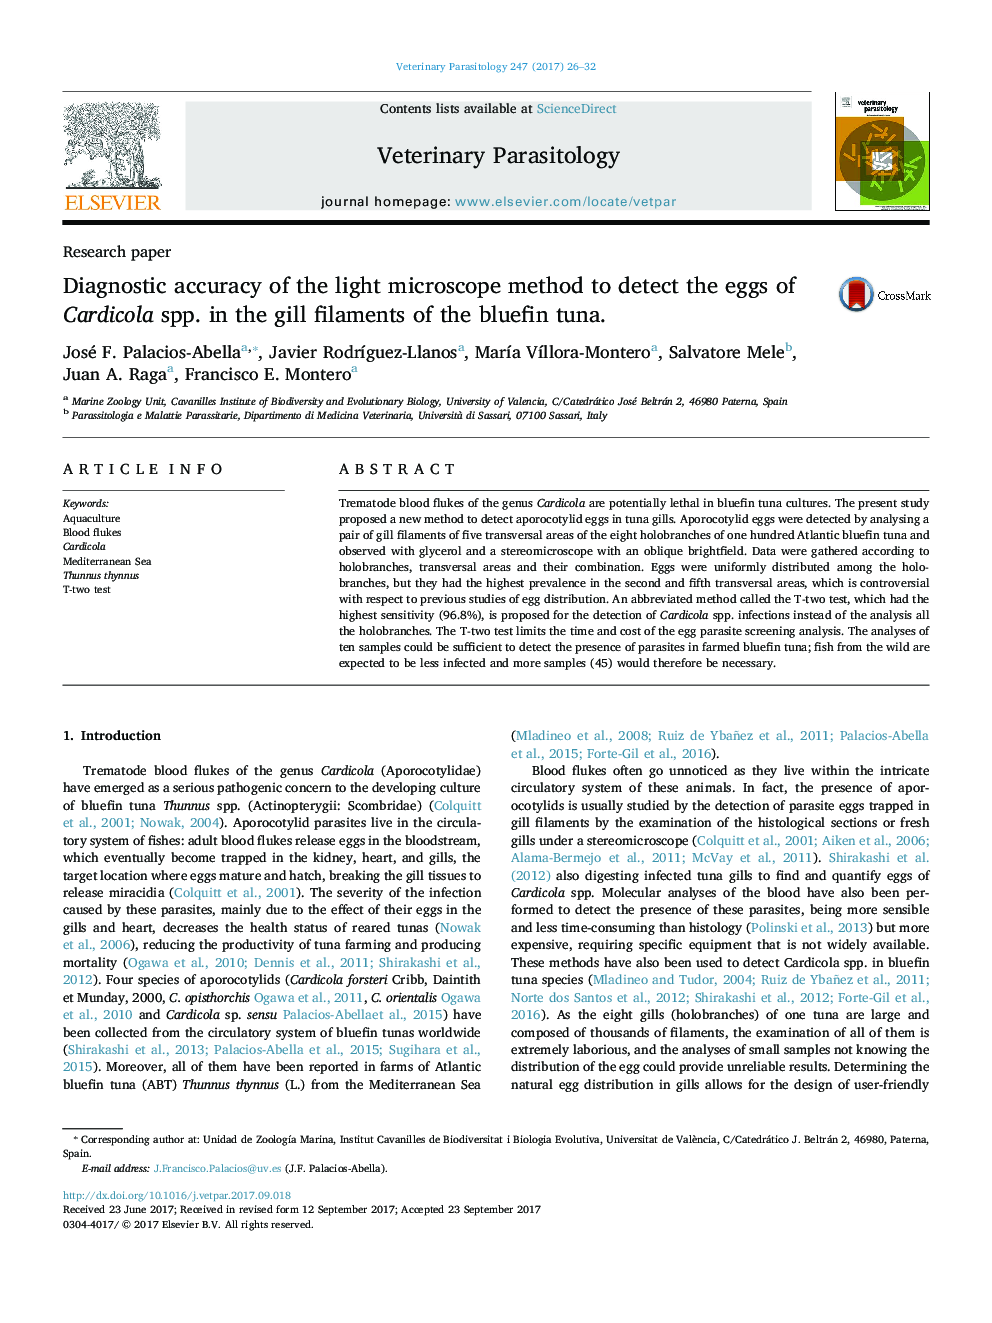 Diagnostic accuracy of the light microscope method to detect the eggs of Cardicola spp. in the gill filaments of the bluefin tuna.